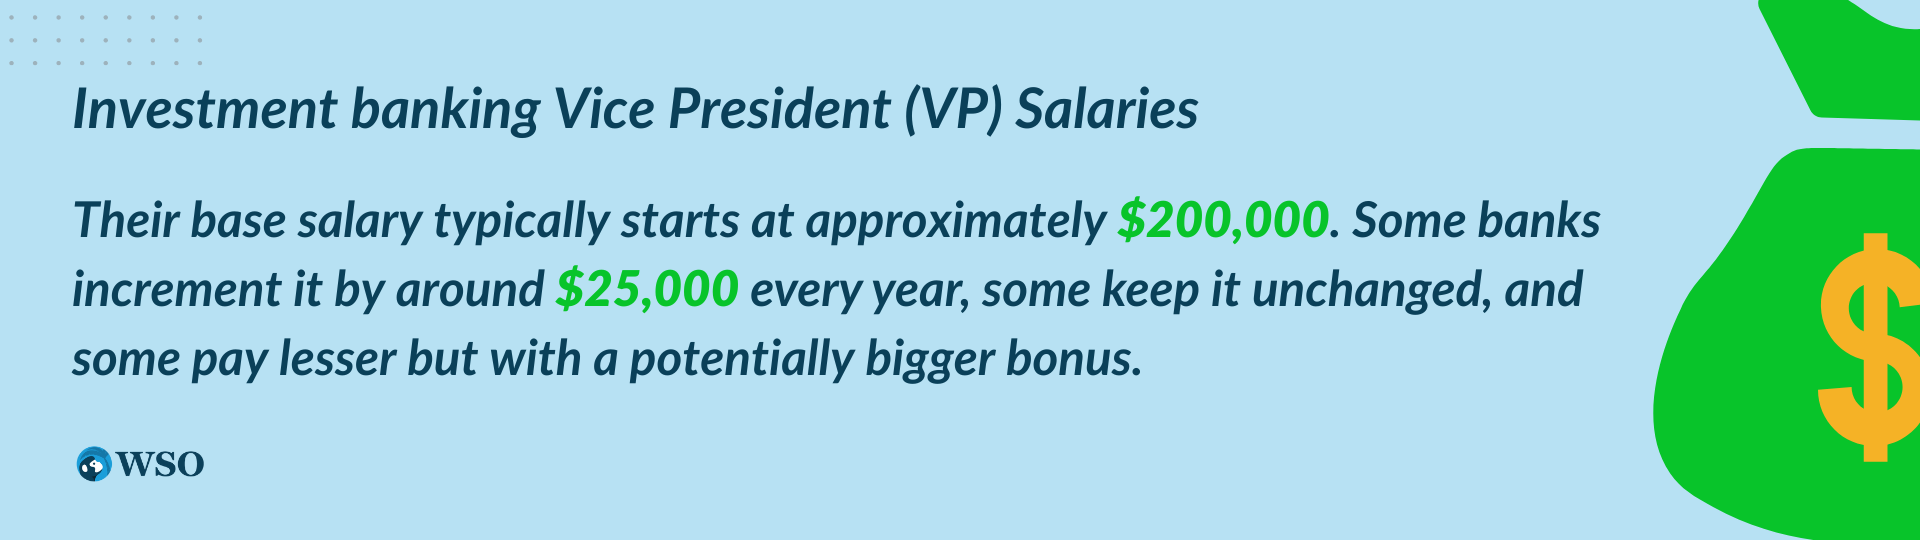 Investment banking Vice President (VP) salaries